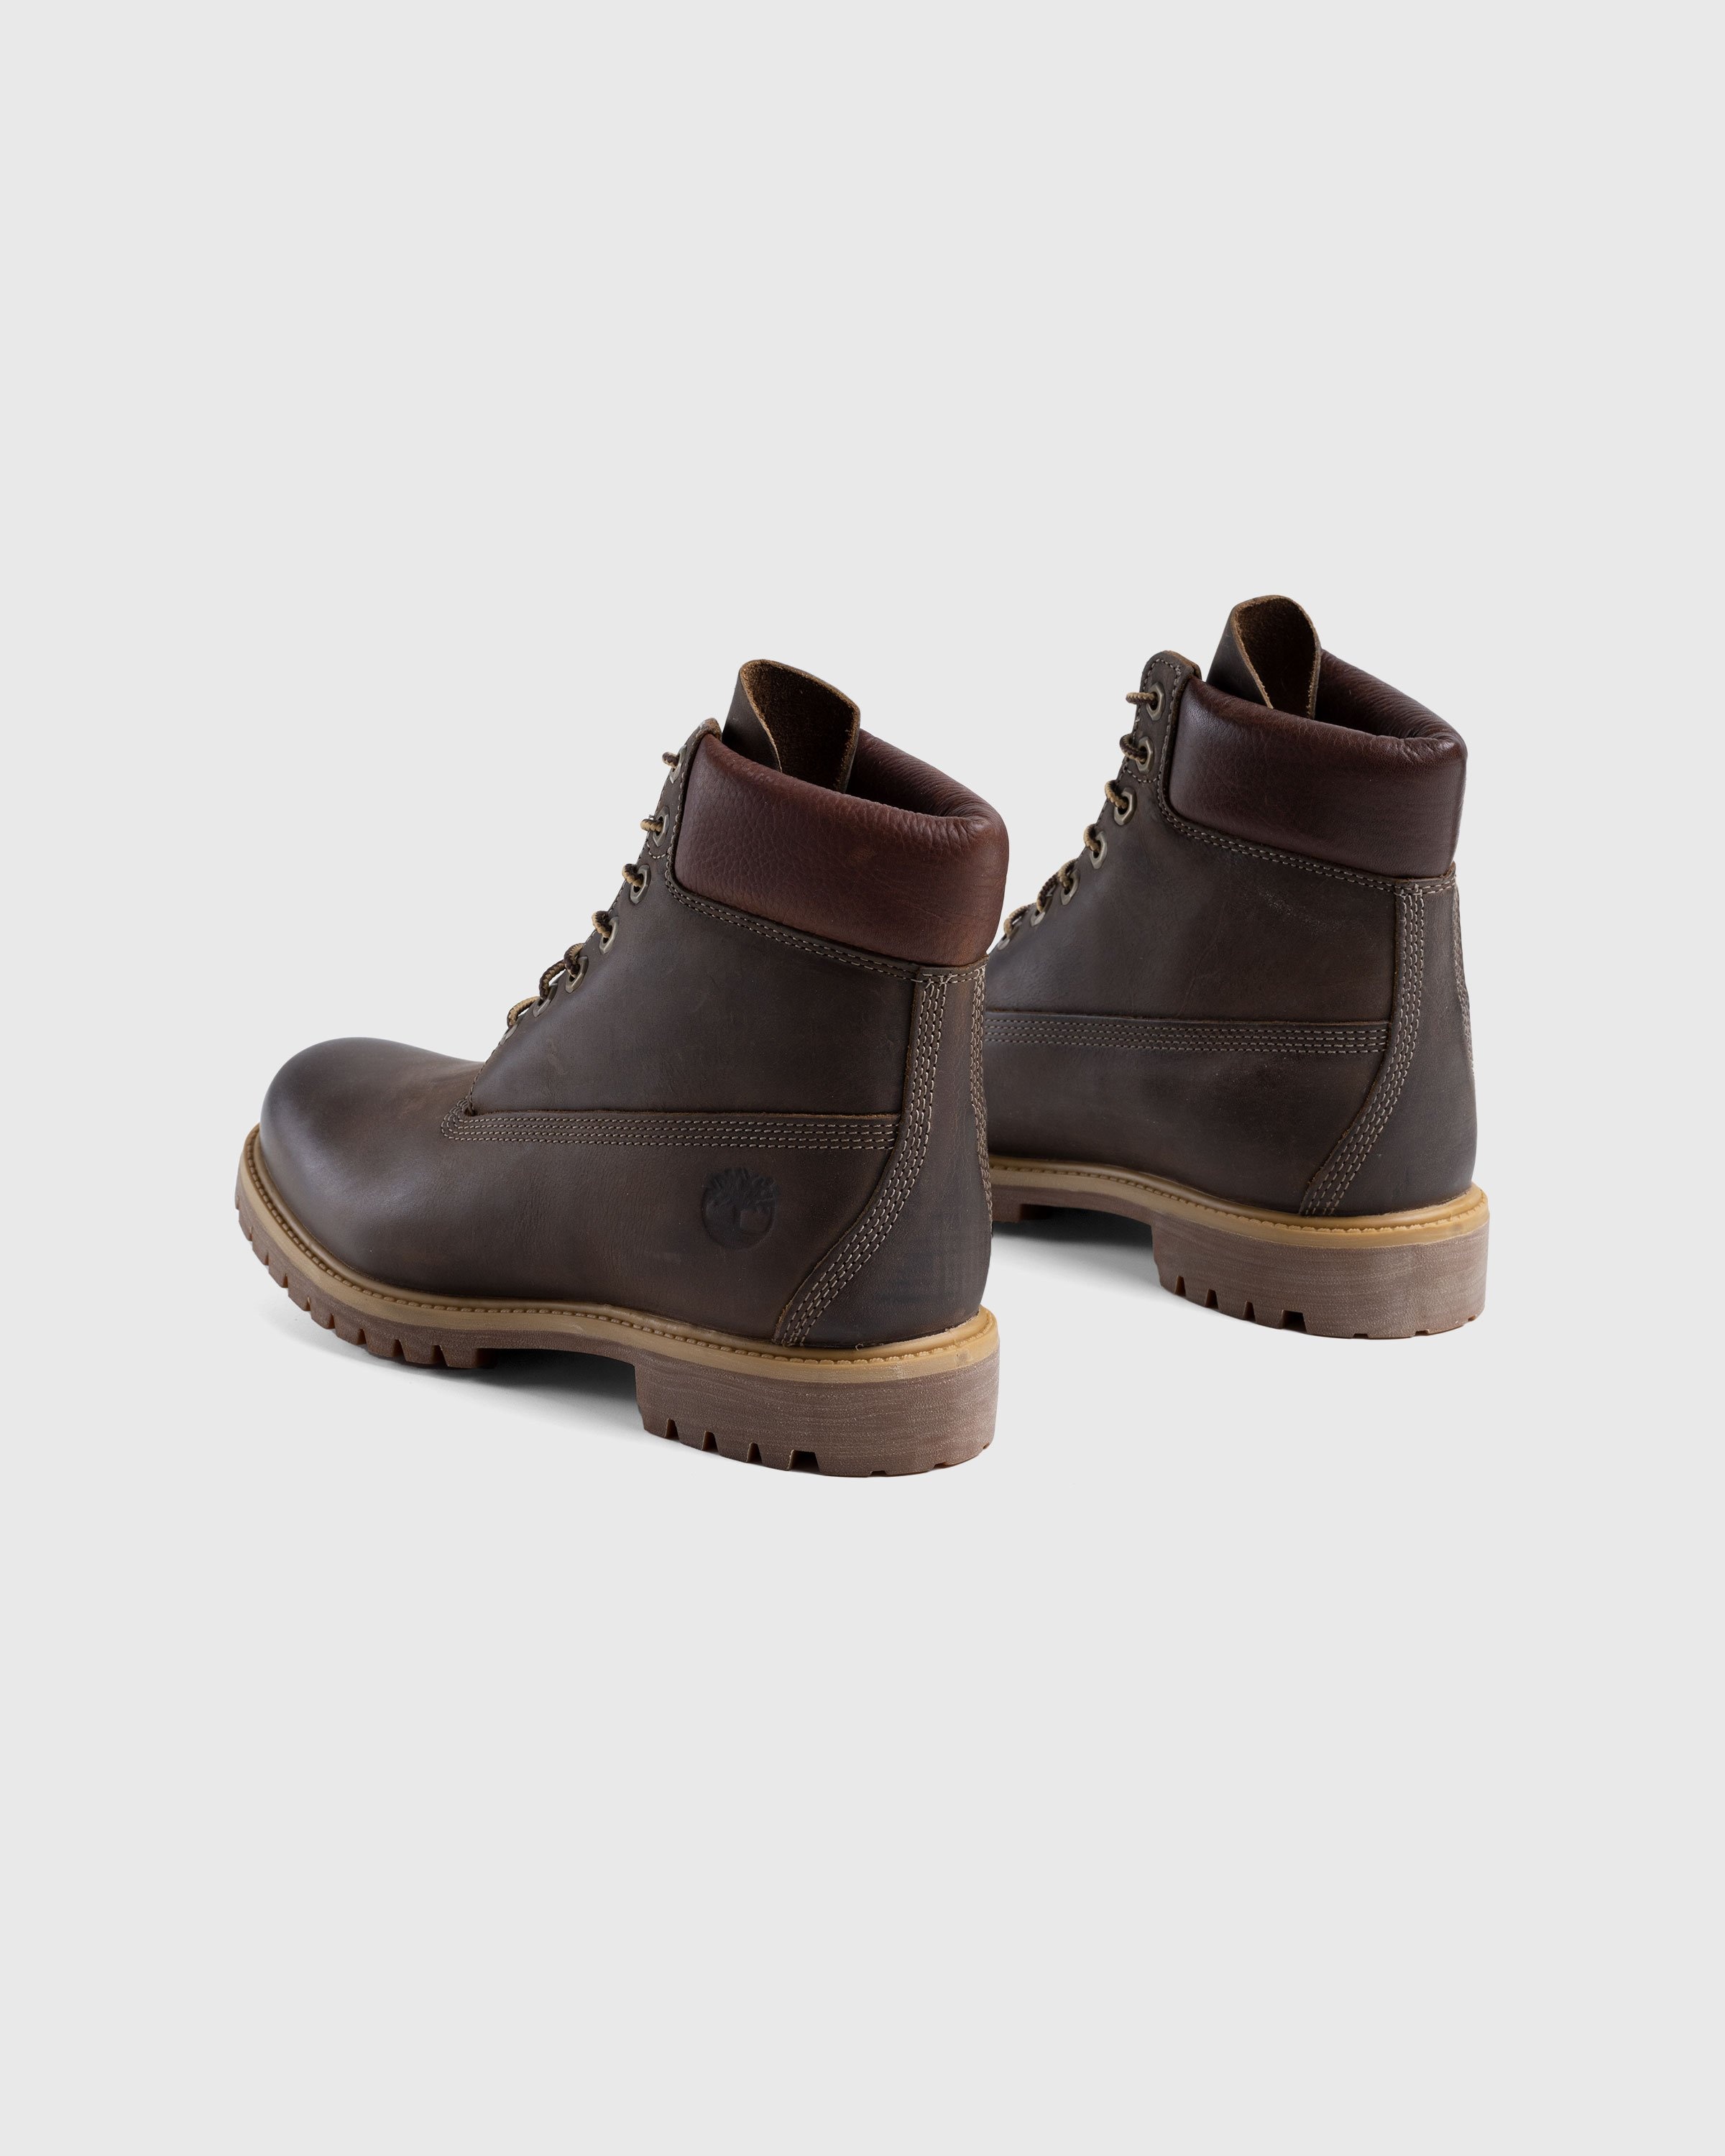 Timberland – Heritage 6 in Premium Brown - Boots - Brown - Image 2